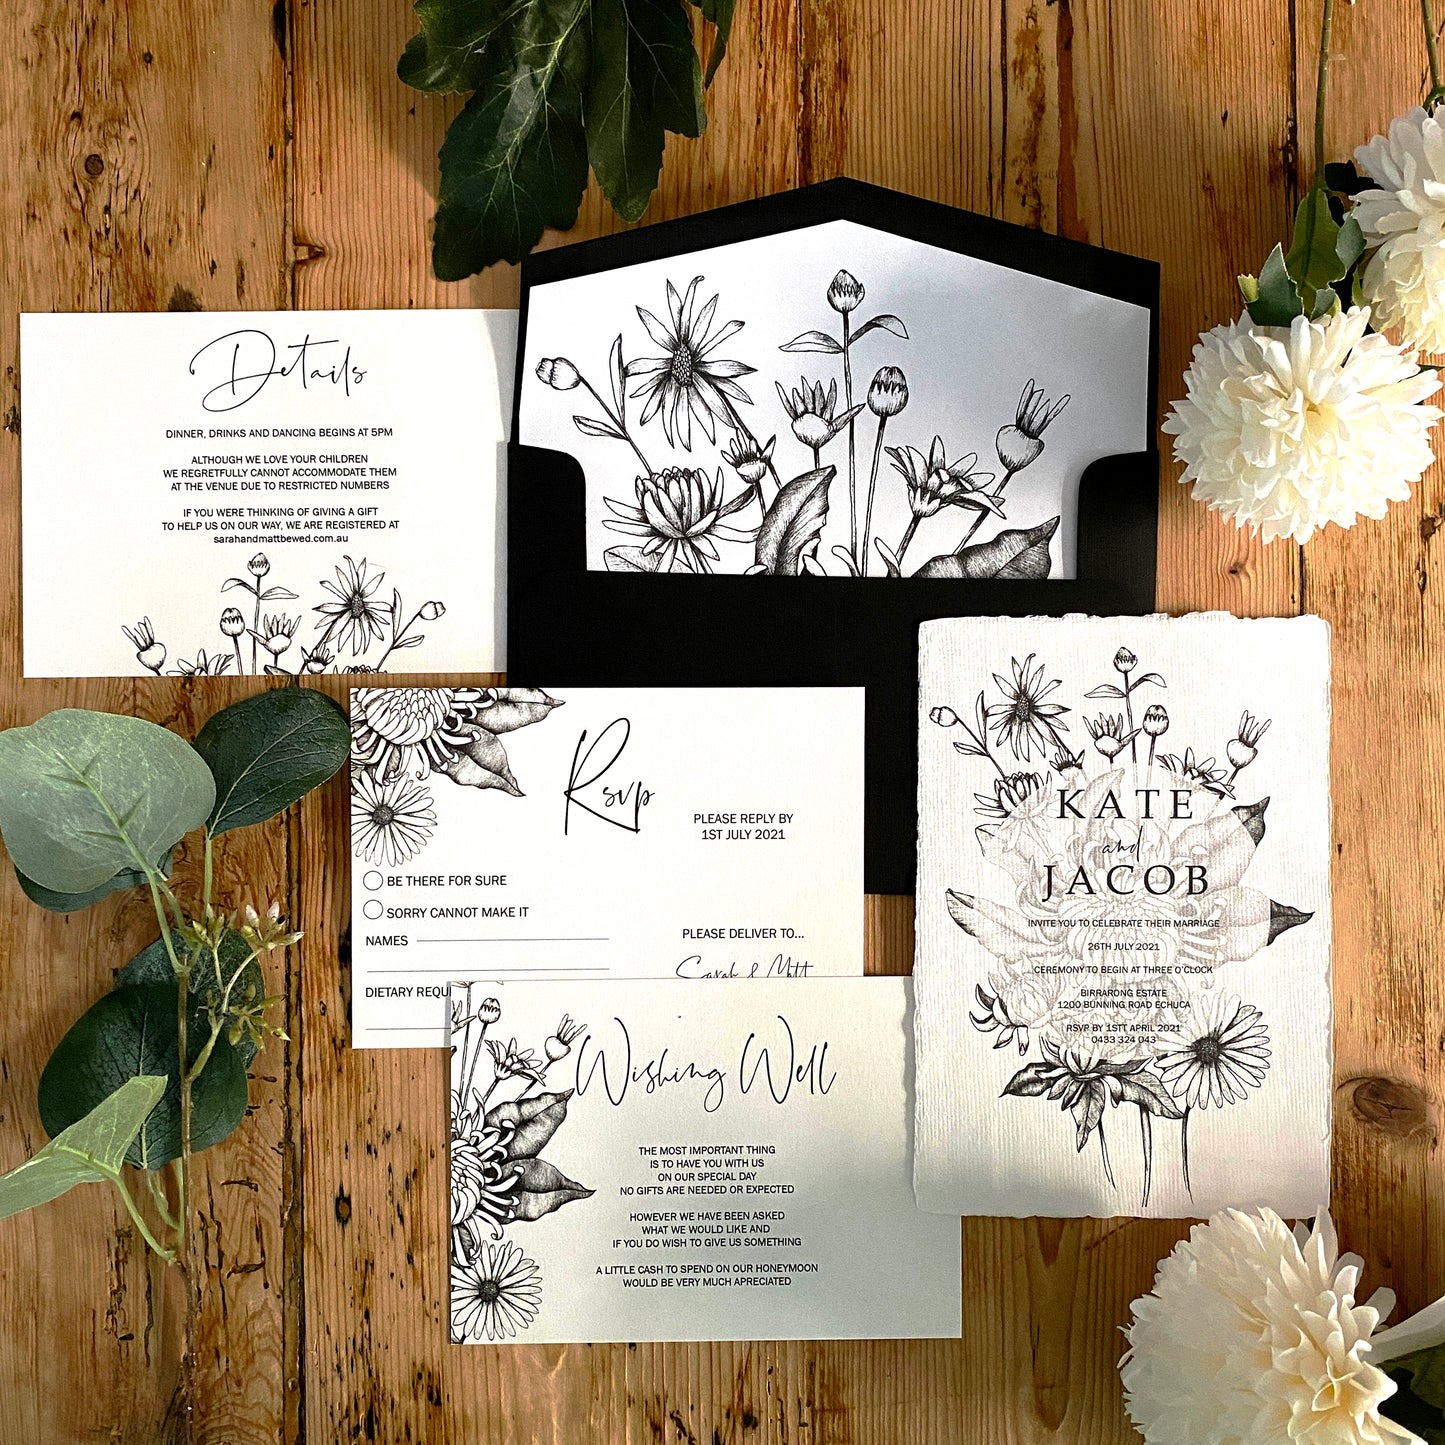 Chrysanthemum wedding invite set, featuring invite, rsvp card, wishing well card, details card and envelope with the envelope liner